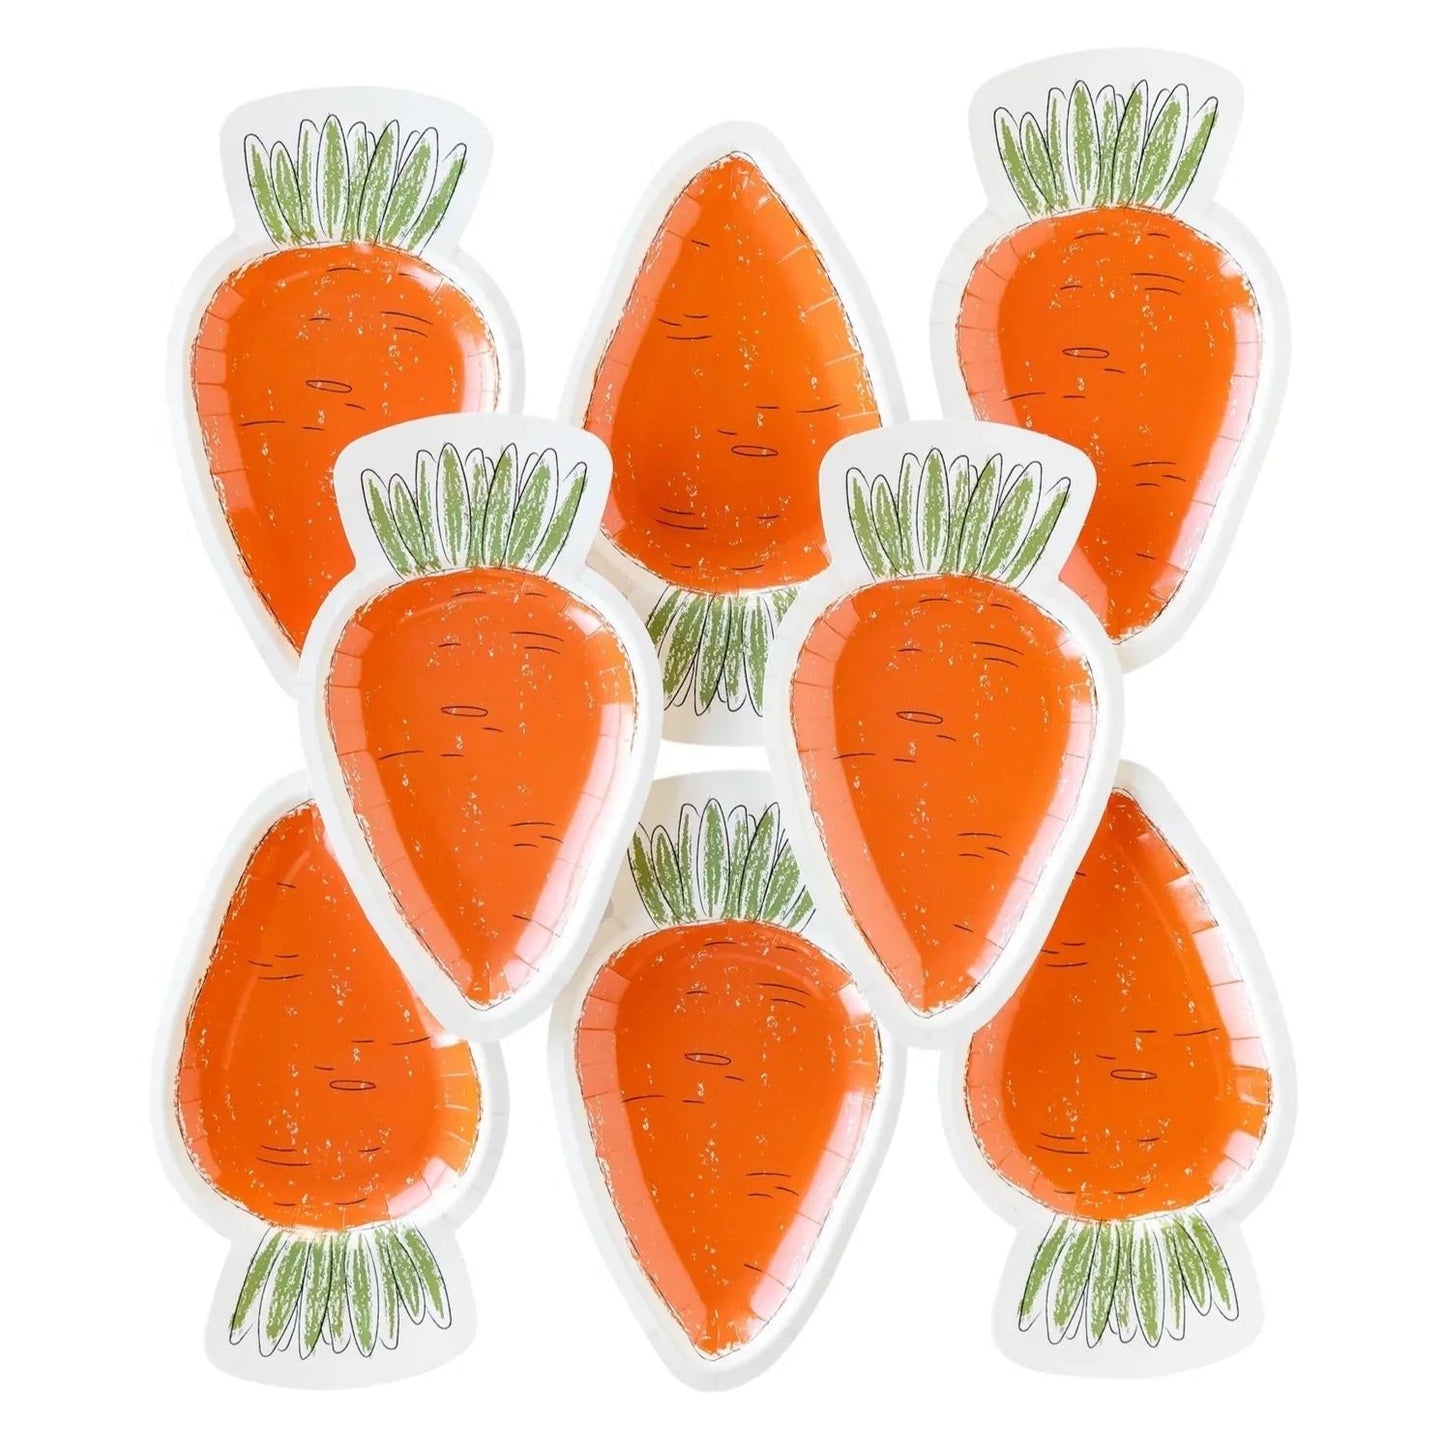 Sketchy Carrot Shaped Plate - PaperGeenius